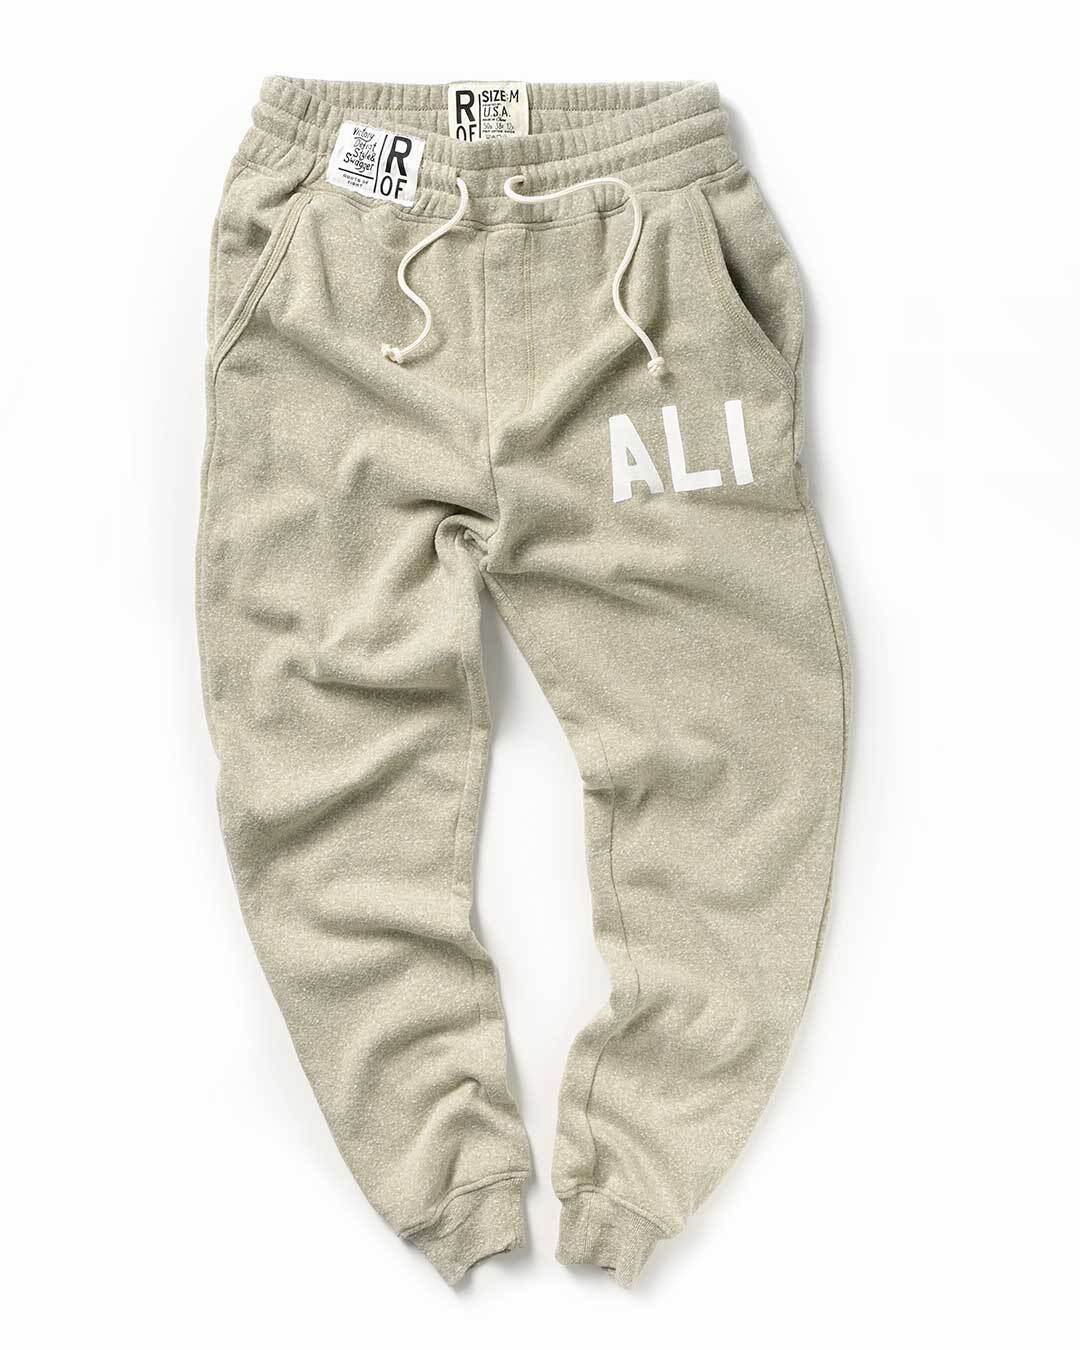 Ali Classic Heather Sage Sweatpants - Roots of Fight